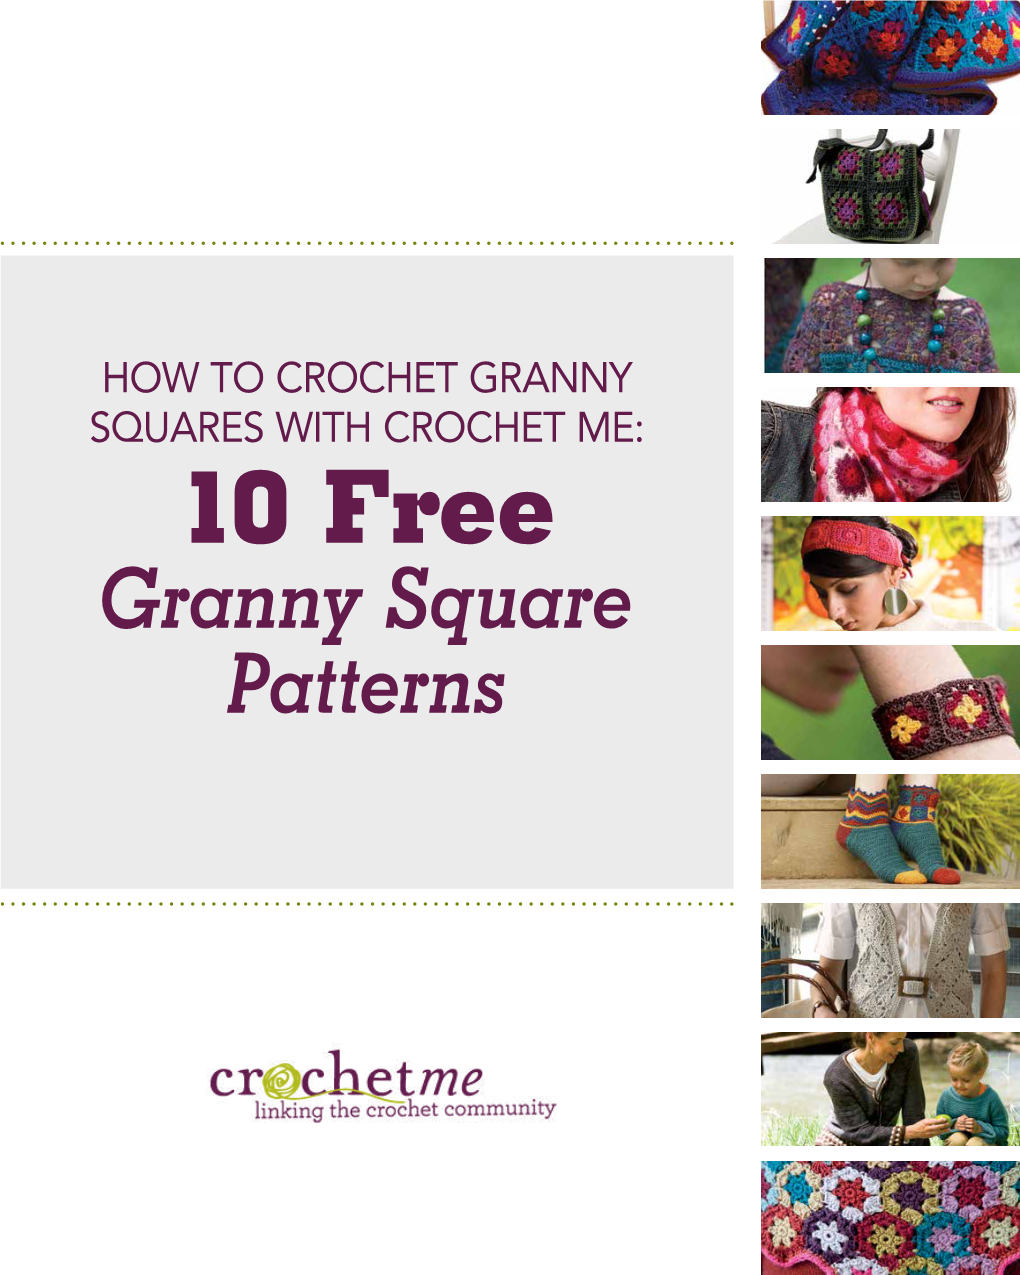 HOW to CROCHET GRANNY SQUARES with CROCHET ME: 10 Free Granny Square Patterns HOW to CROCHET GRANNY SQUARES with CROCHET ME: 10 Free Granny Square Patterns